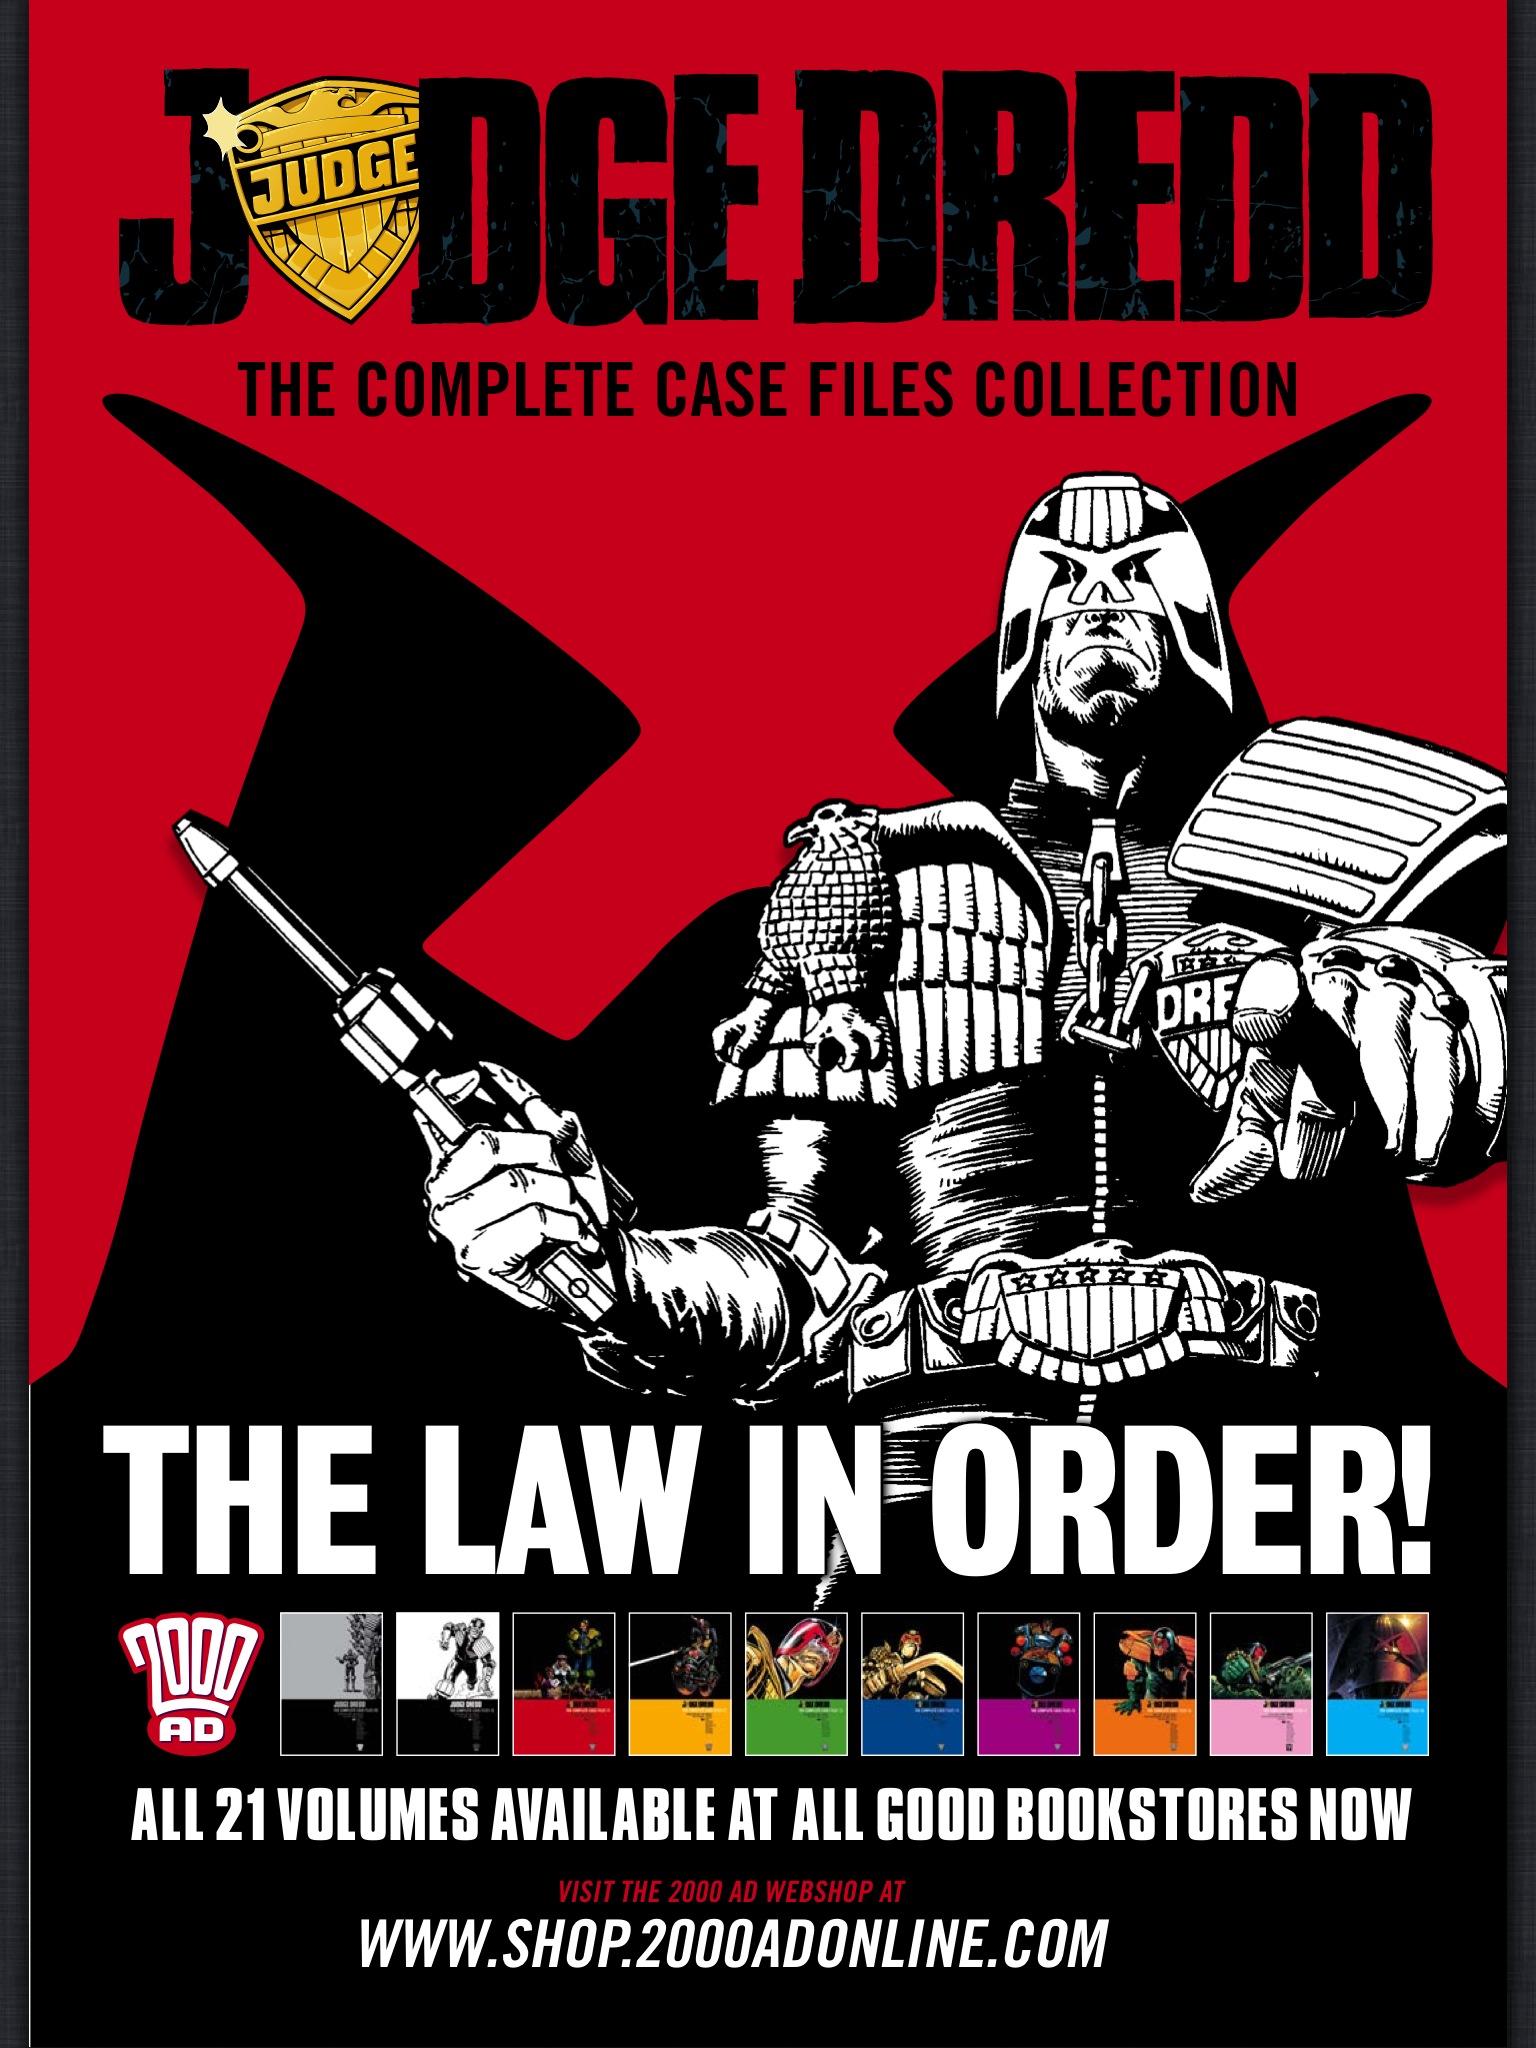 Read online Judge Dredd: The Complete Case Files comic -  Issue # TPB 18 - 306